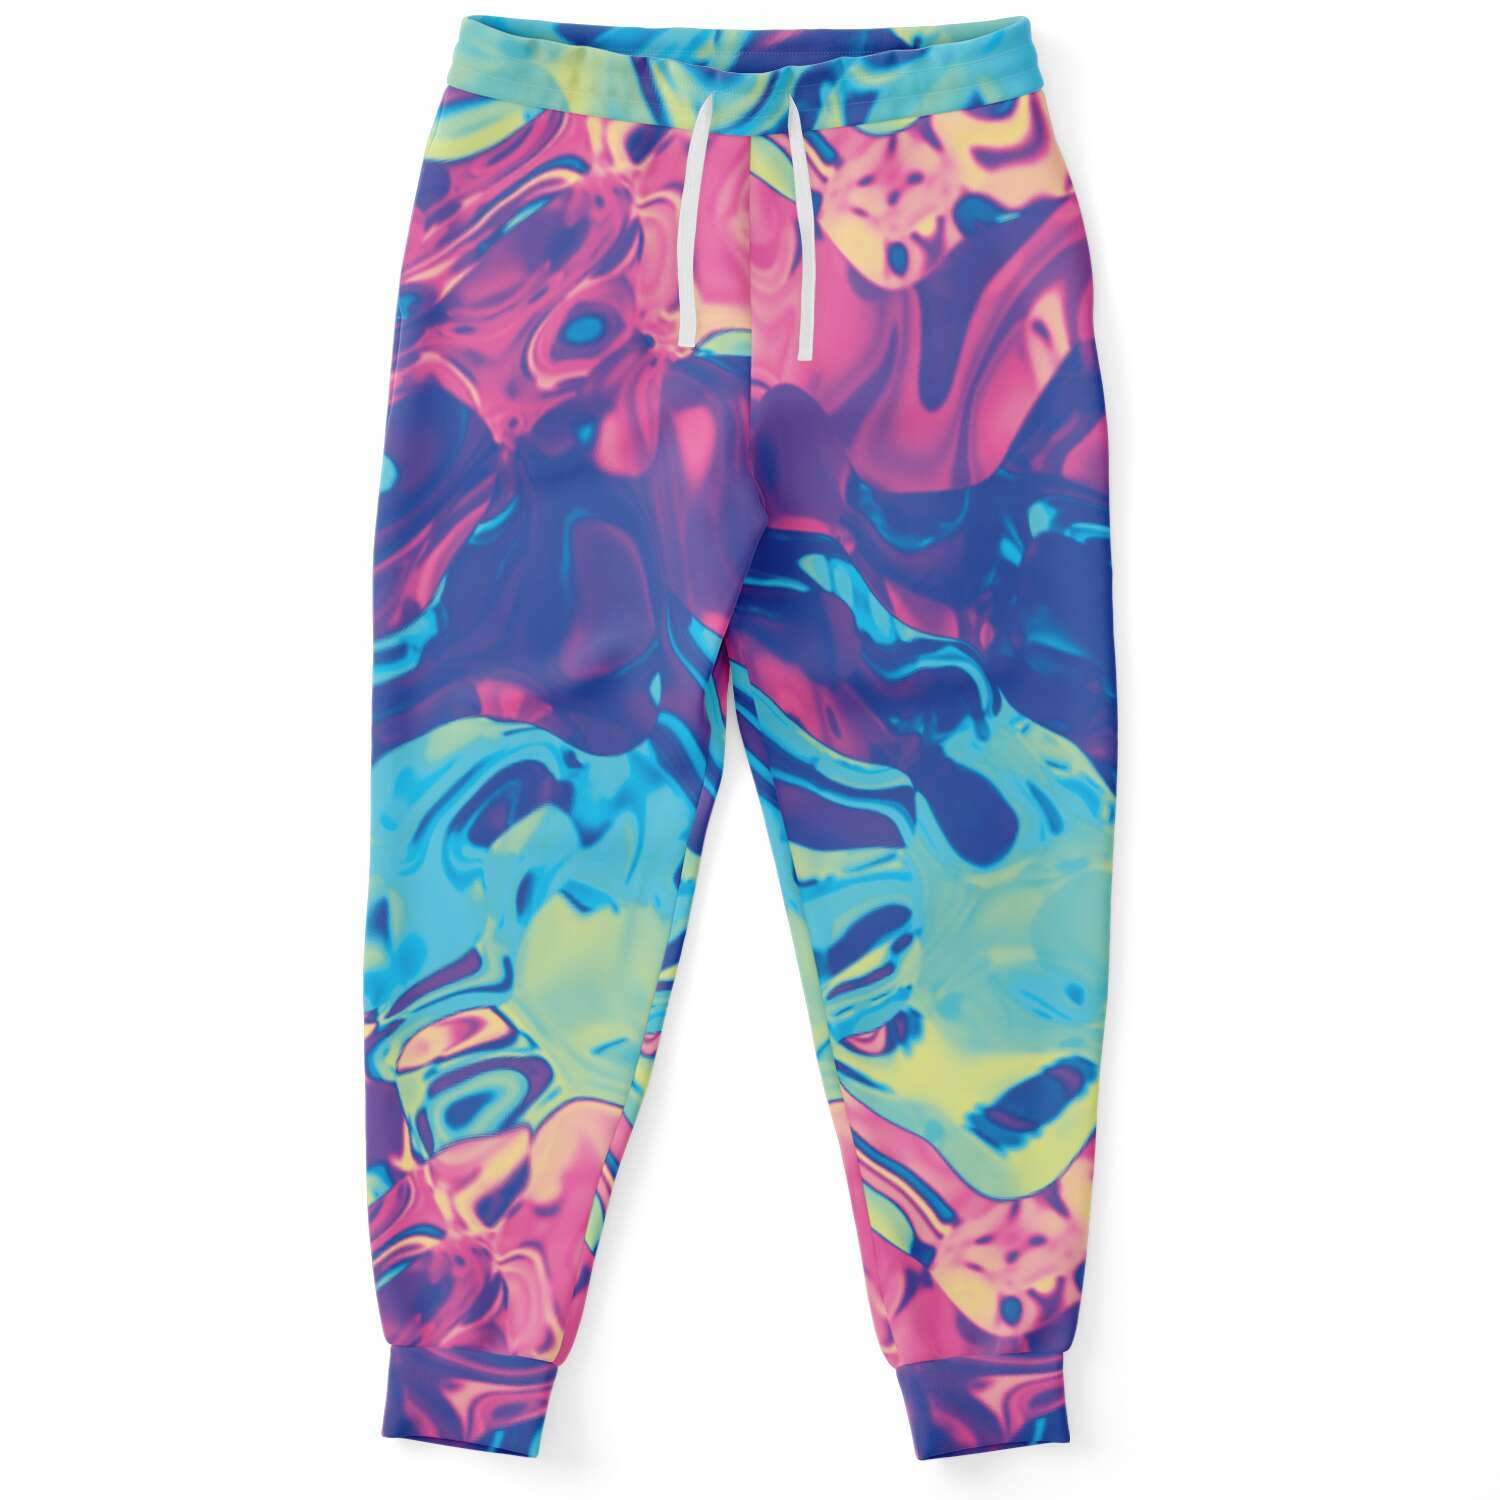 Colorful Holographic Iridescent Joggers - kayzers